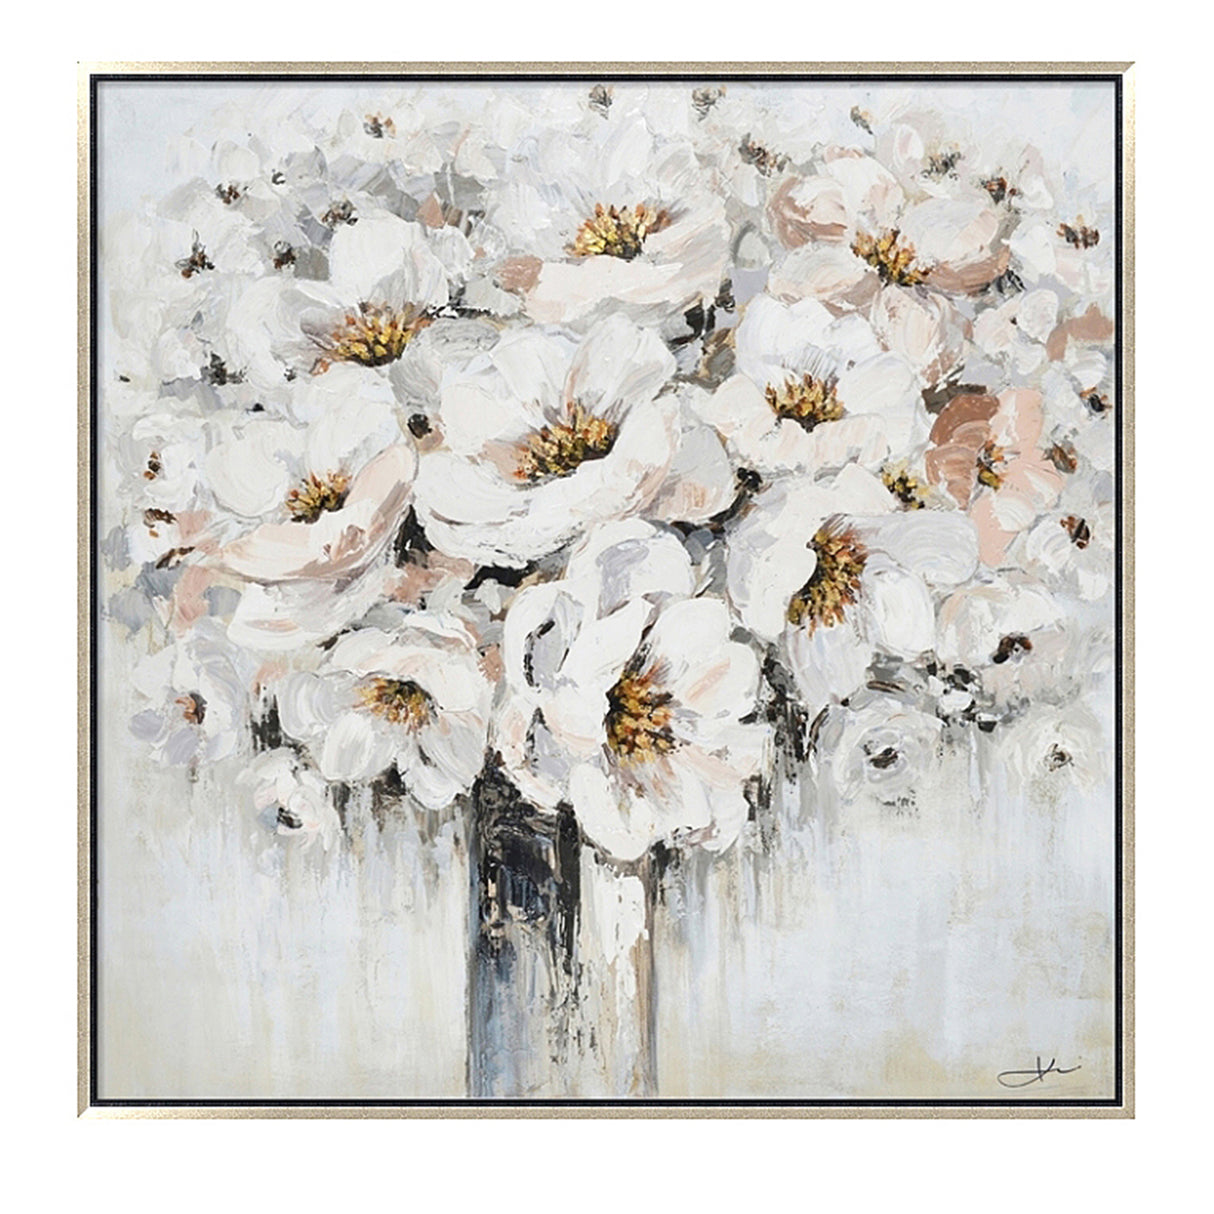 Hand Painted Acrylic Wall Art White Bouquet in Vase on a 39 x 39 Square Canvas with a Champagne Wooden Frame